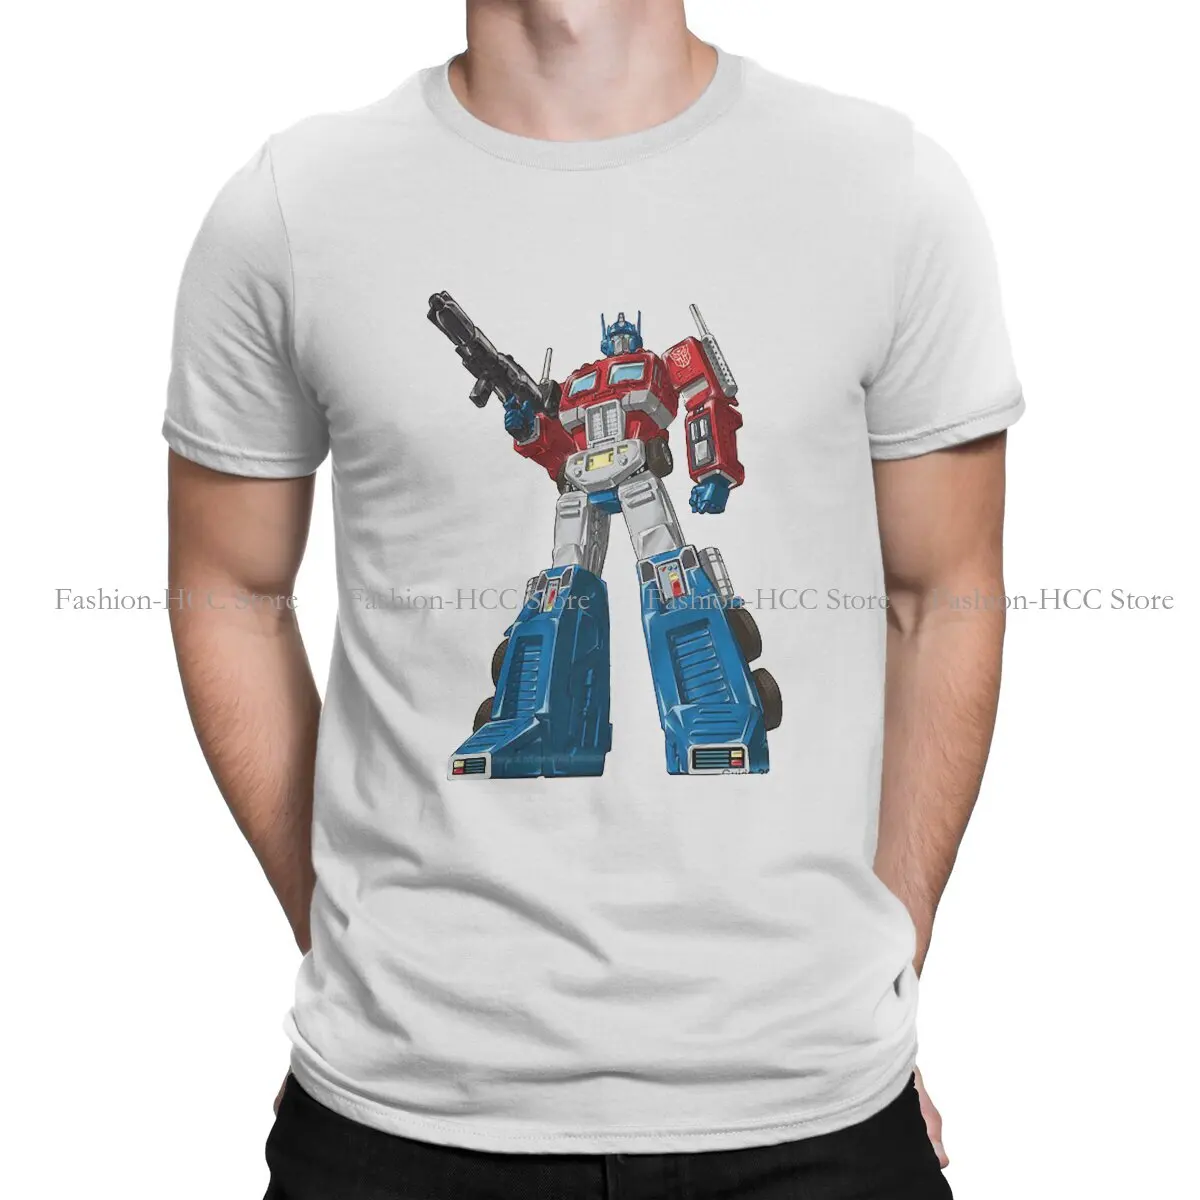 

Optimus Prime Style Polyester TShirt Transformers Science Fiction Action Comfortable Creative Gift Idea T Shirt Stuff